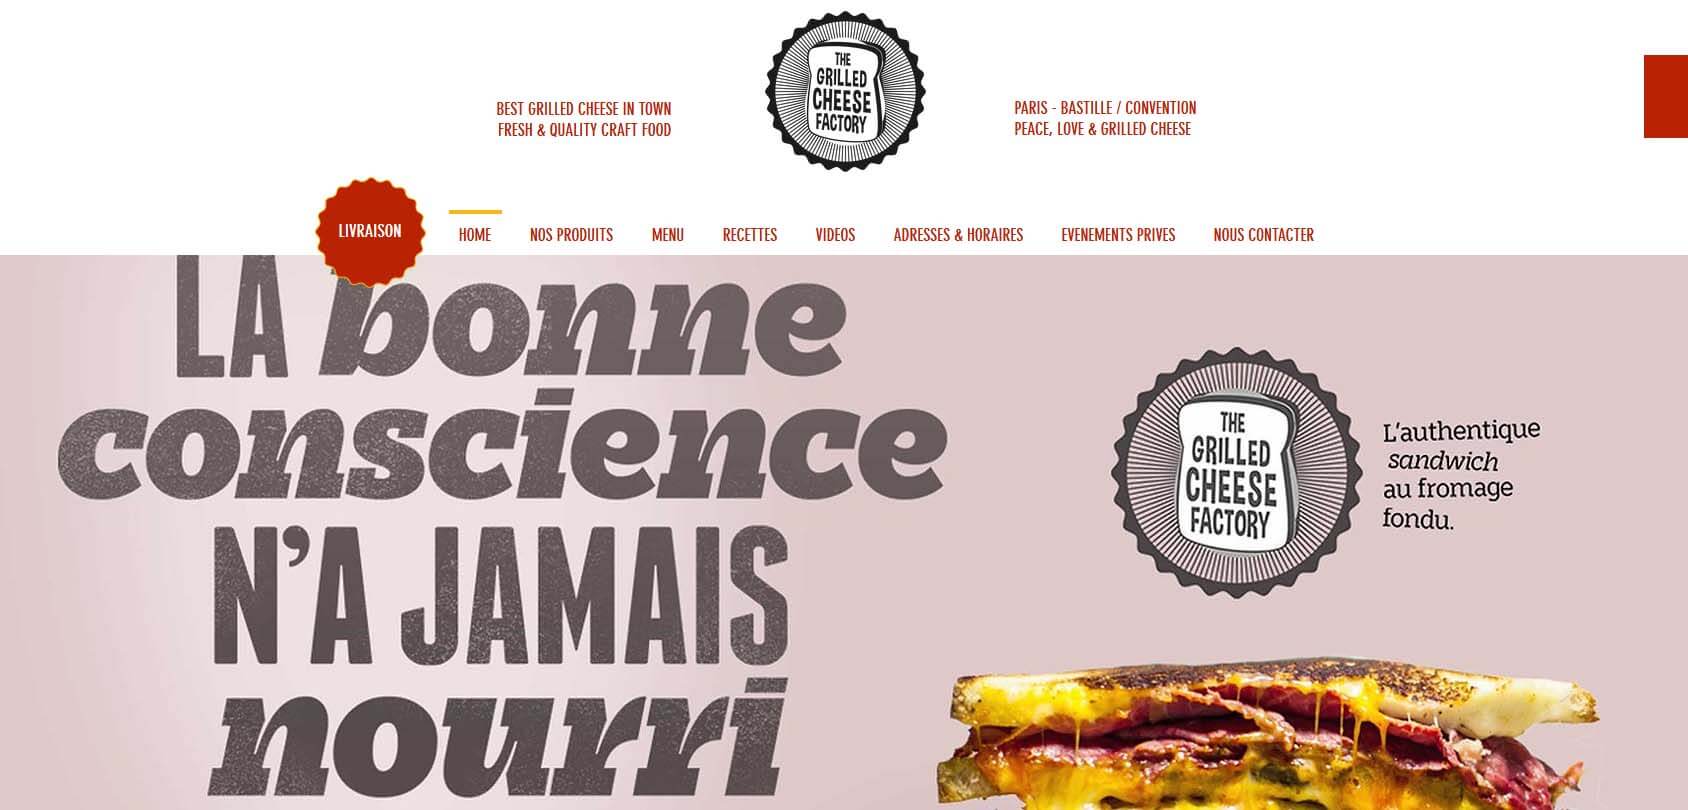 The Grilled Cheese Factory Homepage